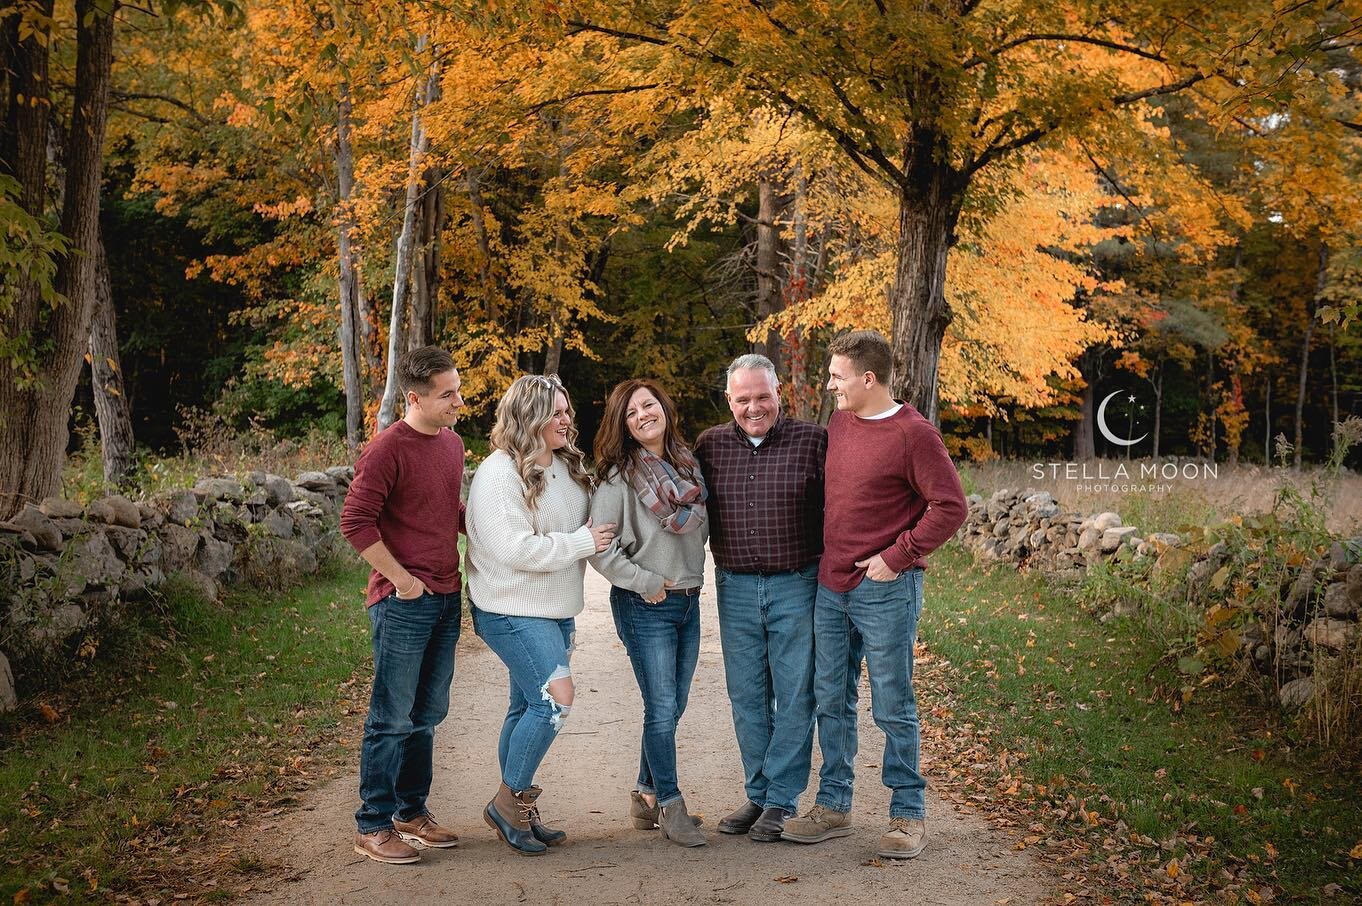 I&rsquo;m a bit behind on my posting but I had a great time with this fabulous family back in October! It was very apparent that they have so much love for each other and also have so much fun together- what a great combination! 💕 thank you Espinola